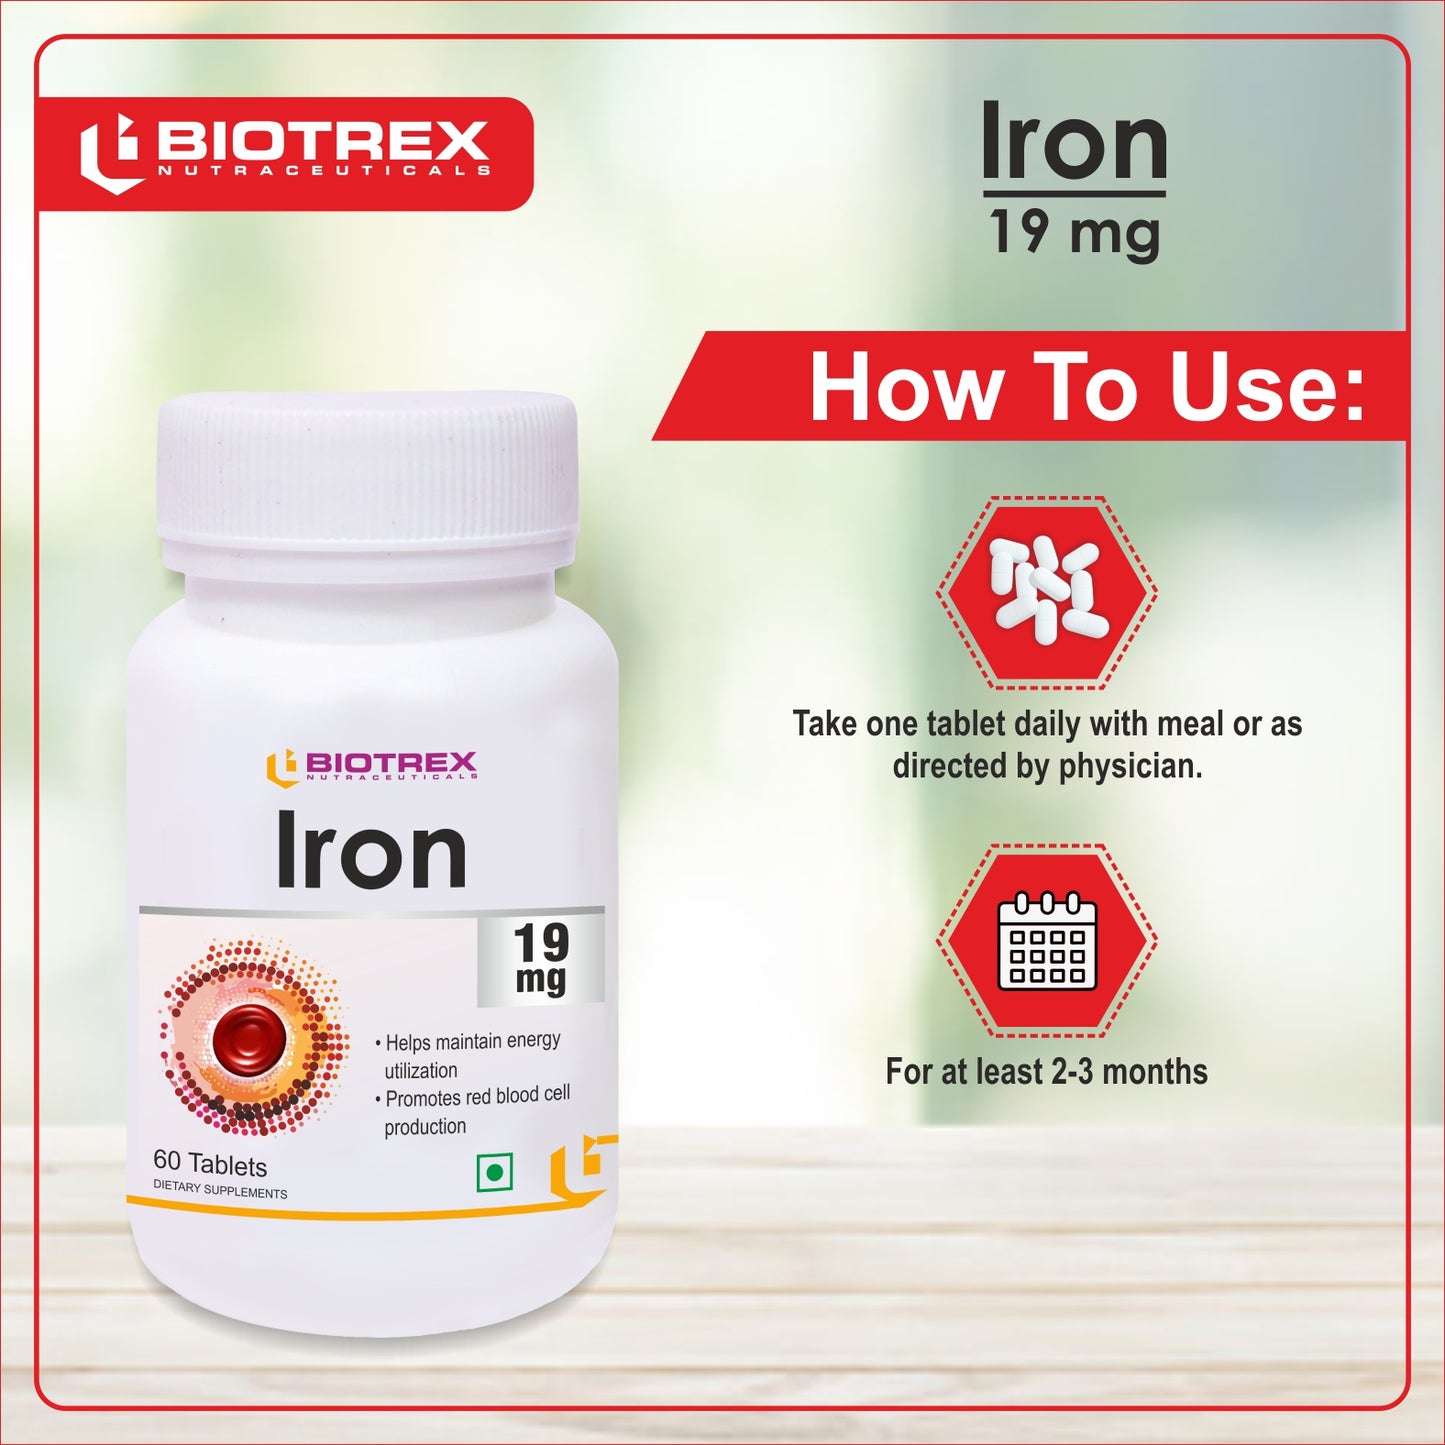 Biotrex Nutraceuticals Iron 19mg (As Ferrous fumarate) | Boosts immunity, Supports energy, Brain function & Muscle function | For Both Men & Women - 60 Tablets